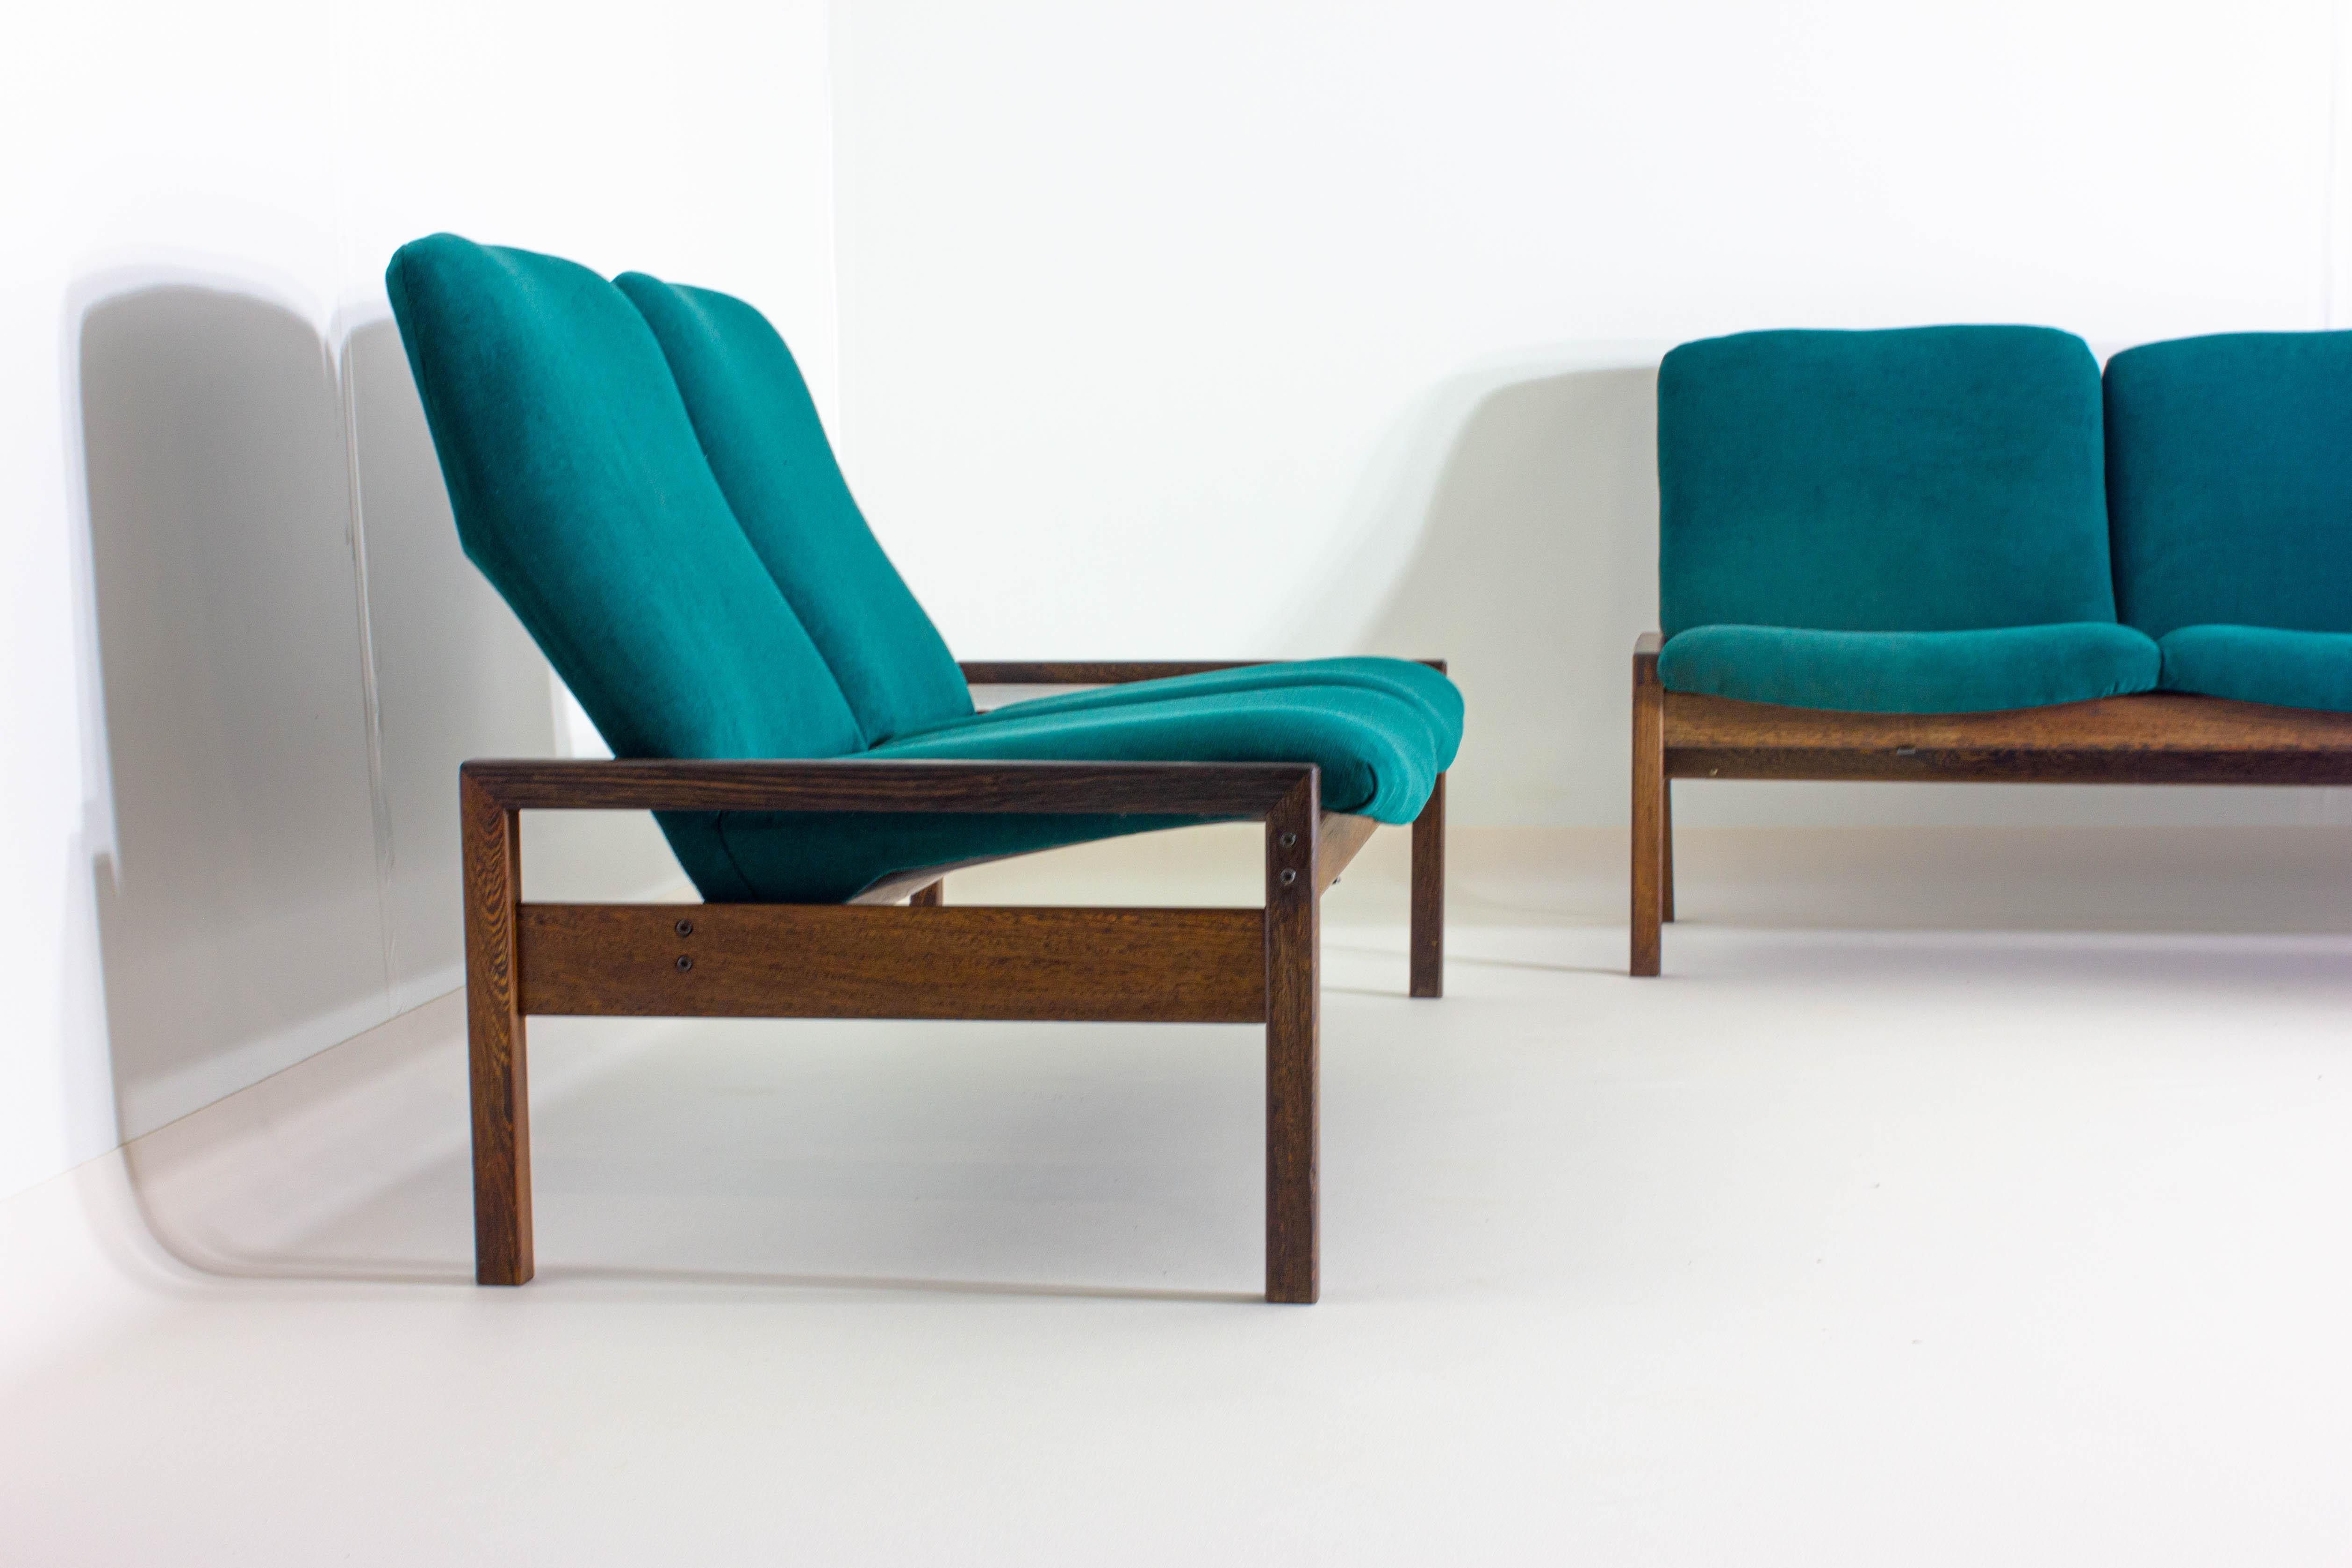 Adorned in a luxurious petrol green upholstery, this unique set by georges van rijk for beaufort exudes a cool, confident vibe that’s both retro and refreshingly contemporary. The vibrant green shade is a nod to the bold color palettes of its era,